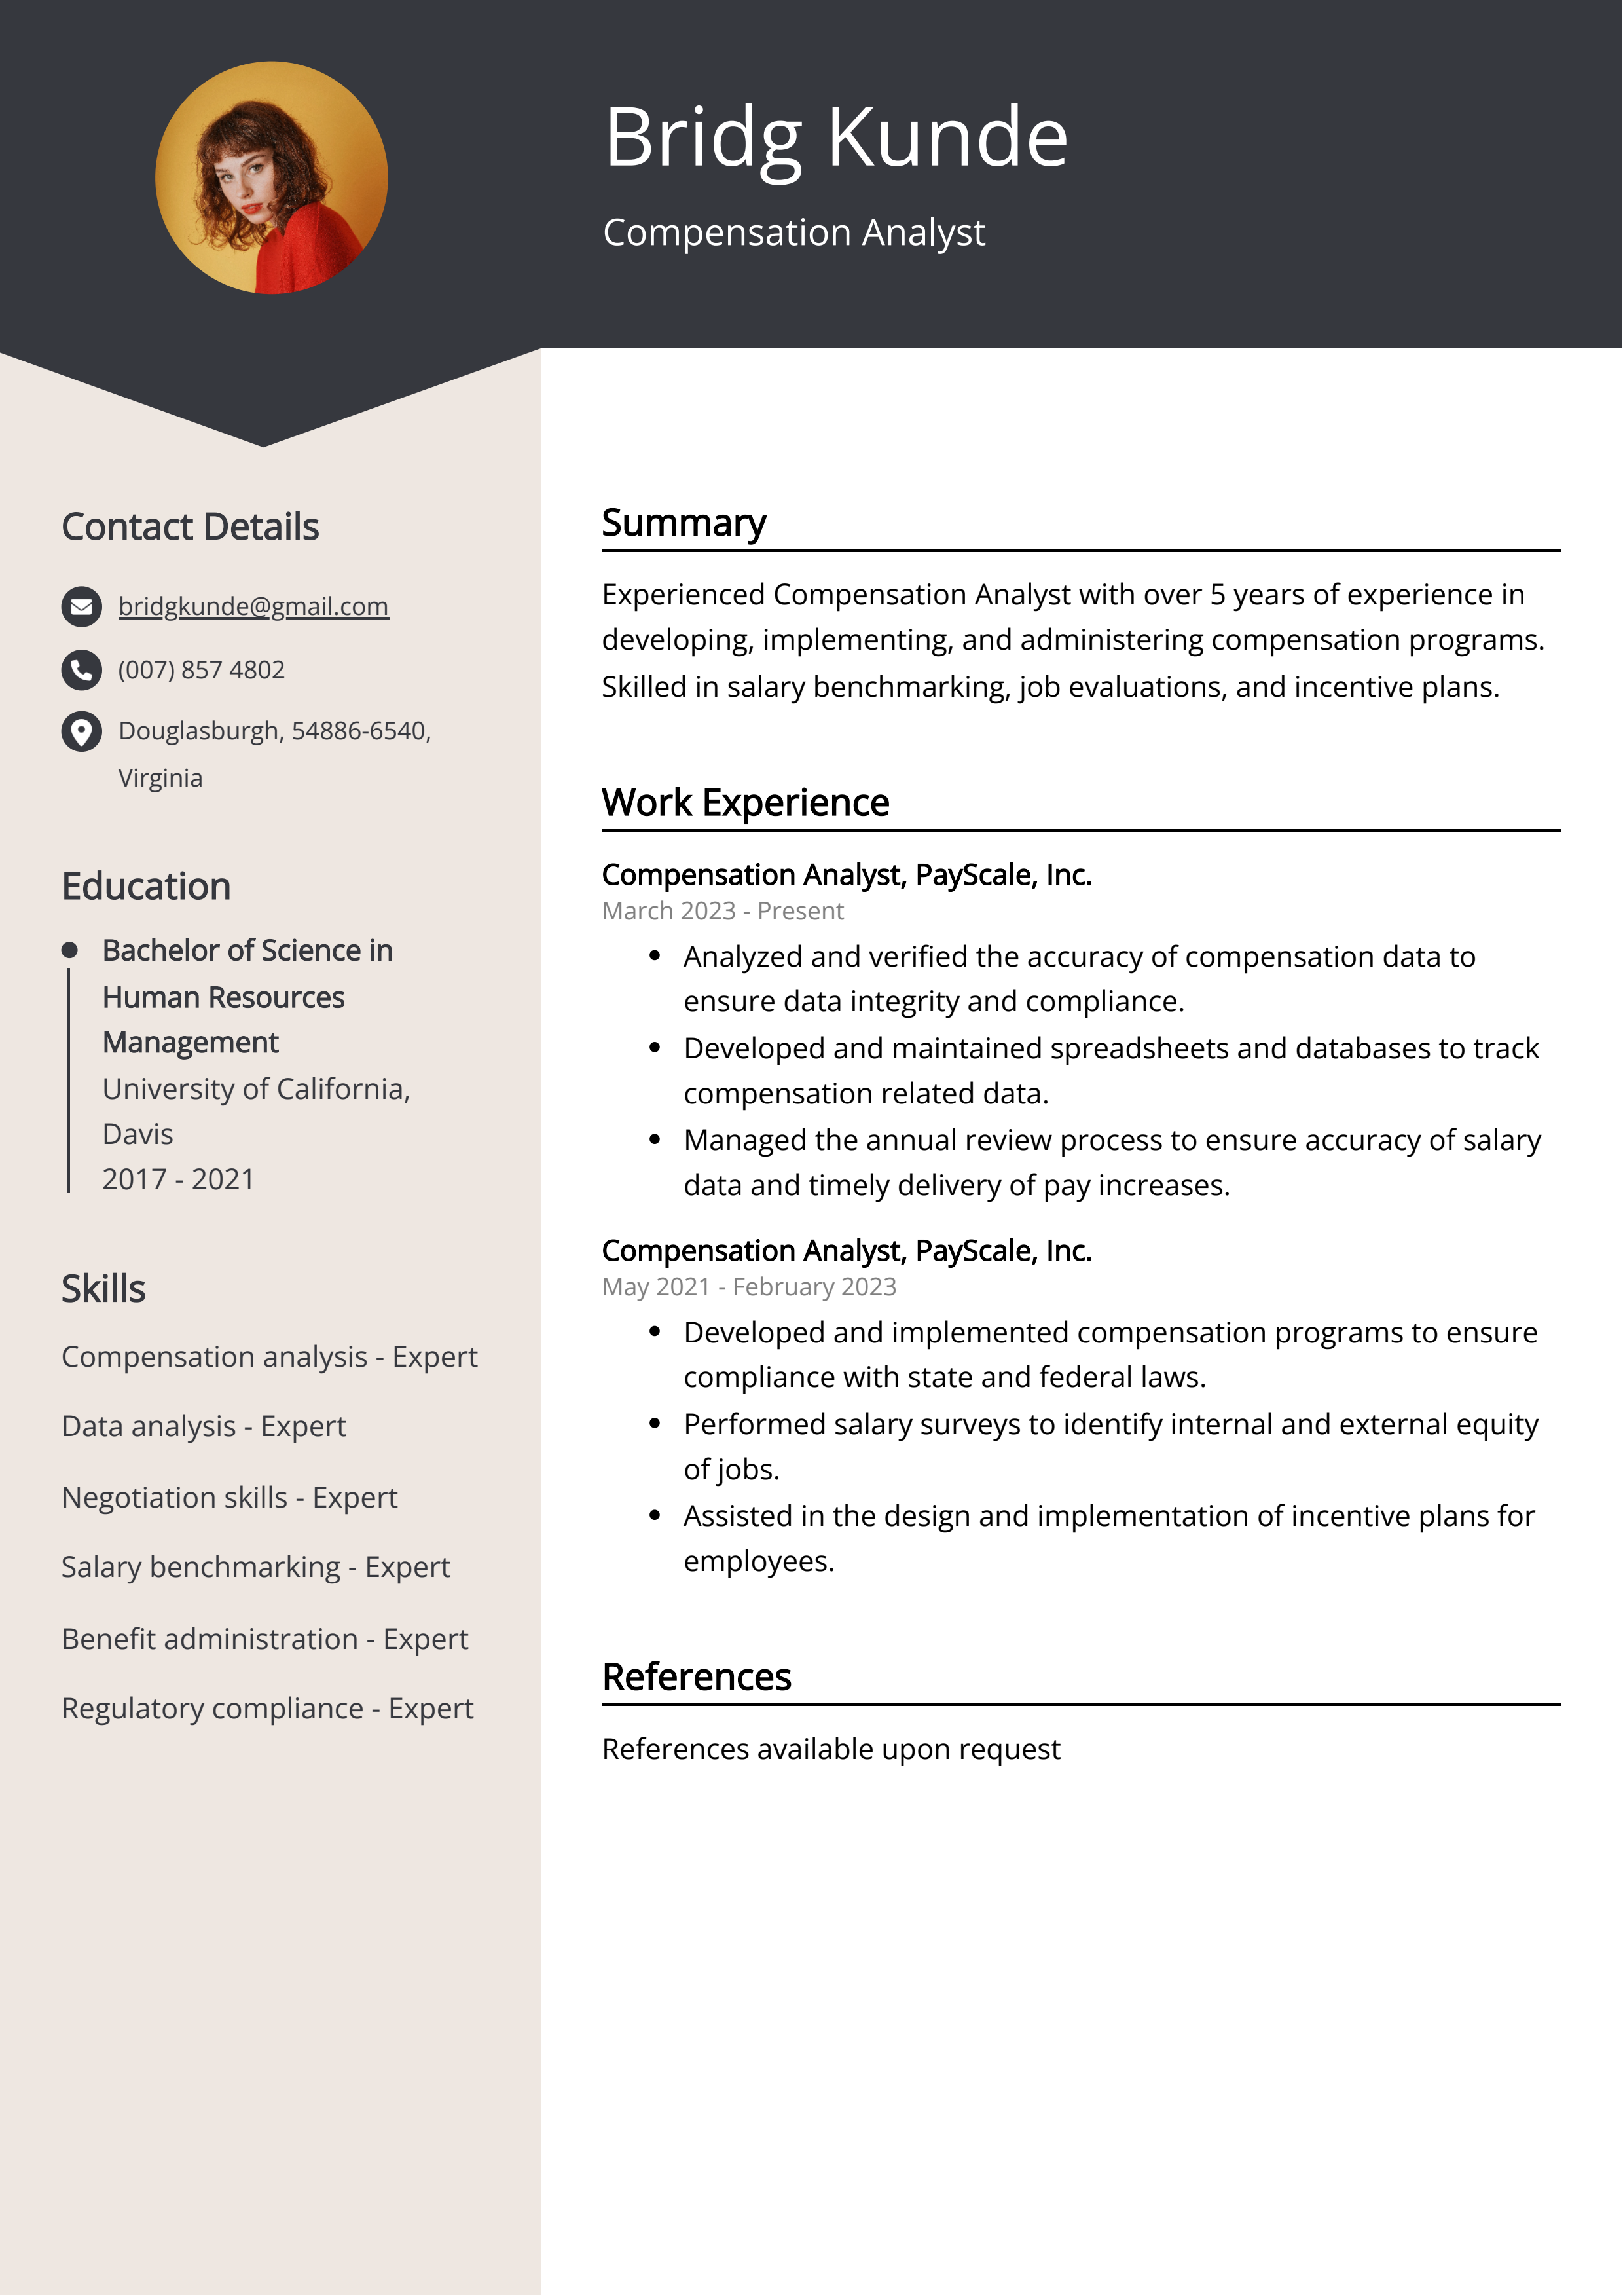 Compensation Analyst CV Example